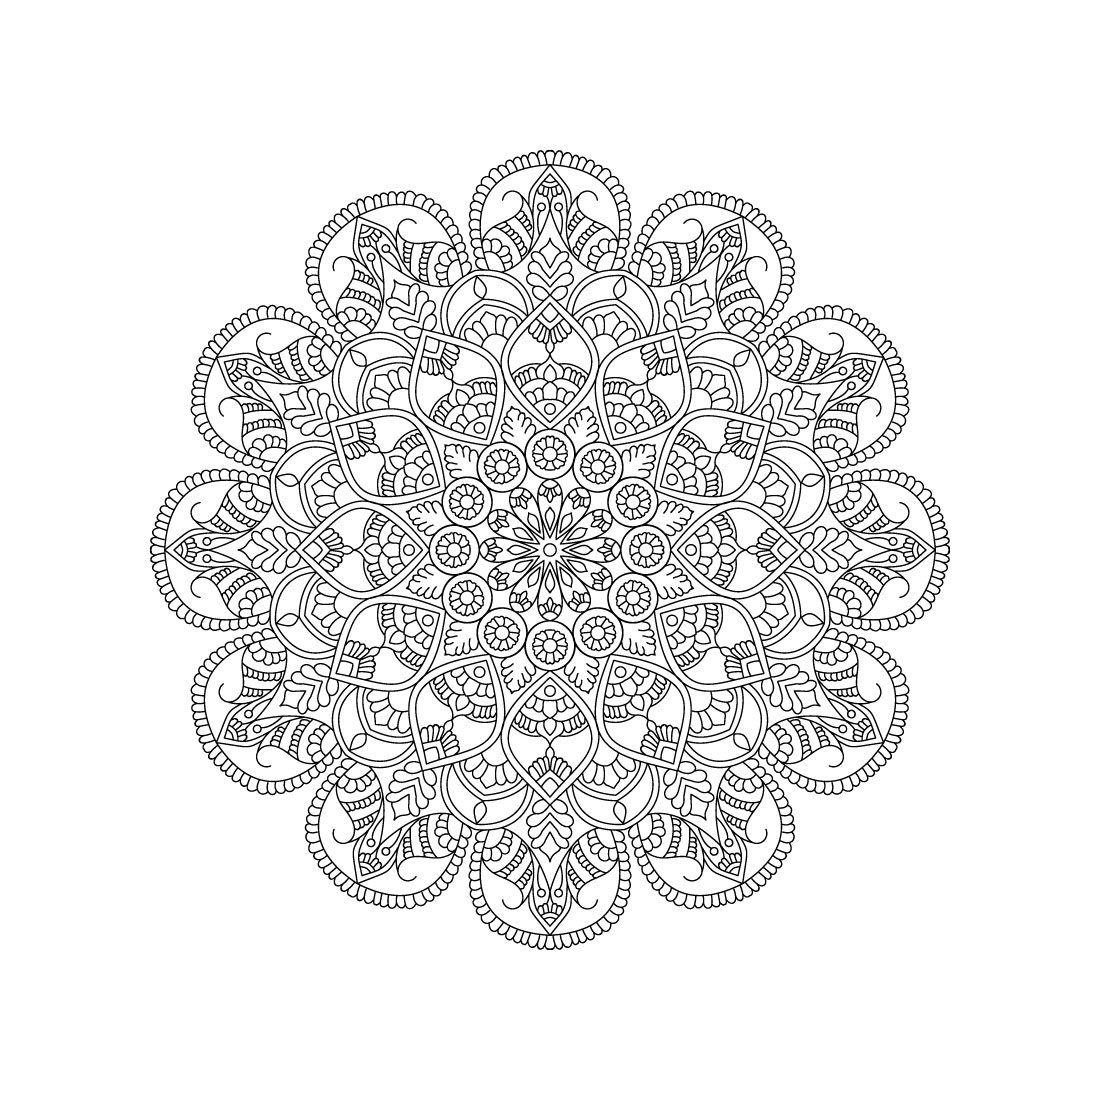 bundle of 10 tranquility mandala coloring book pages 04 612